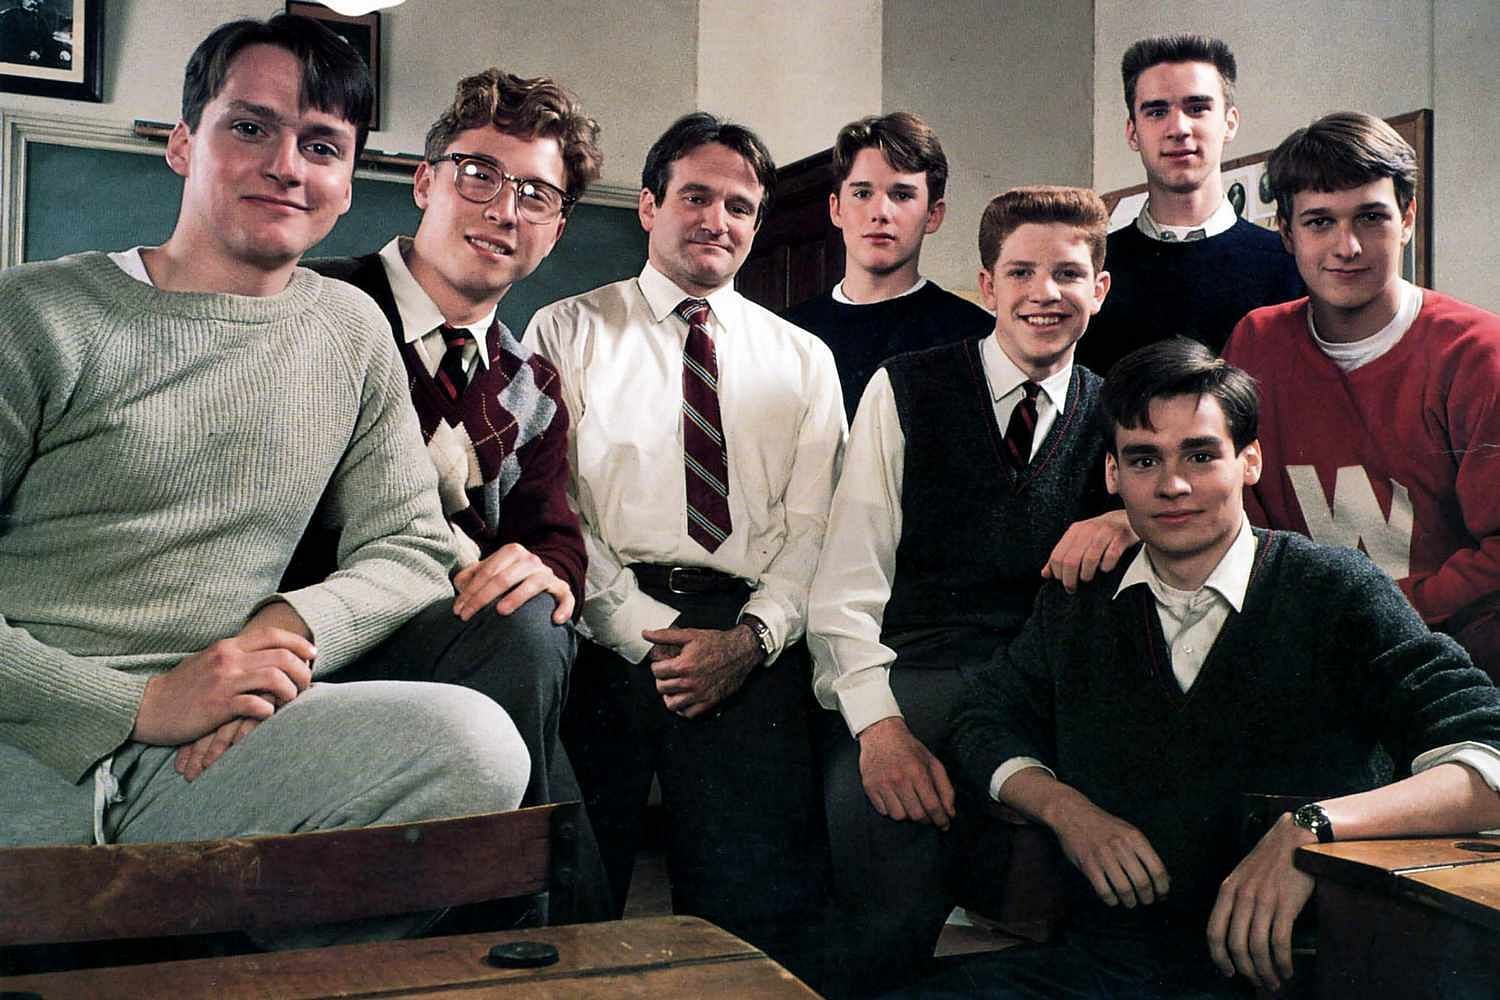 Dead Poets Society (Image via Touchstone Pictures)